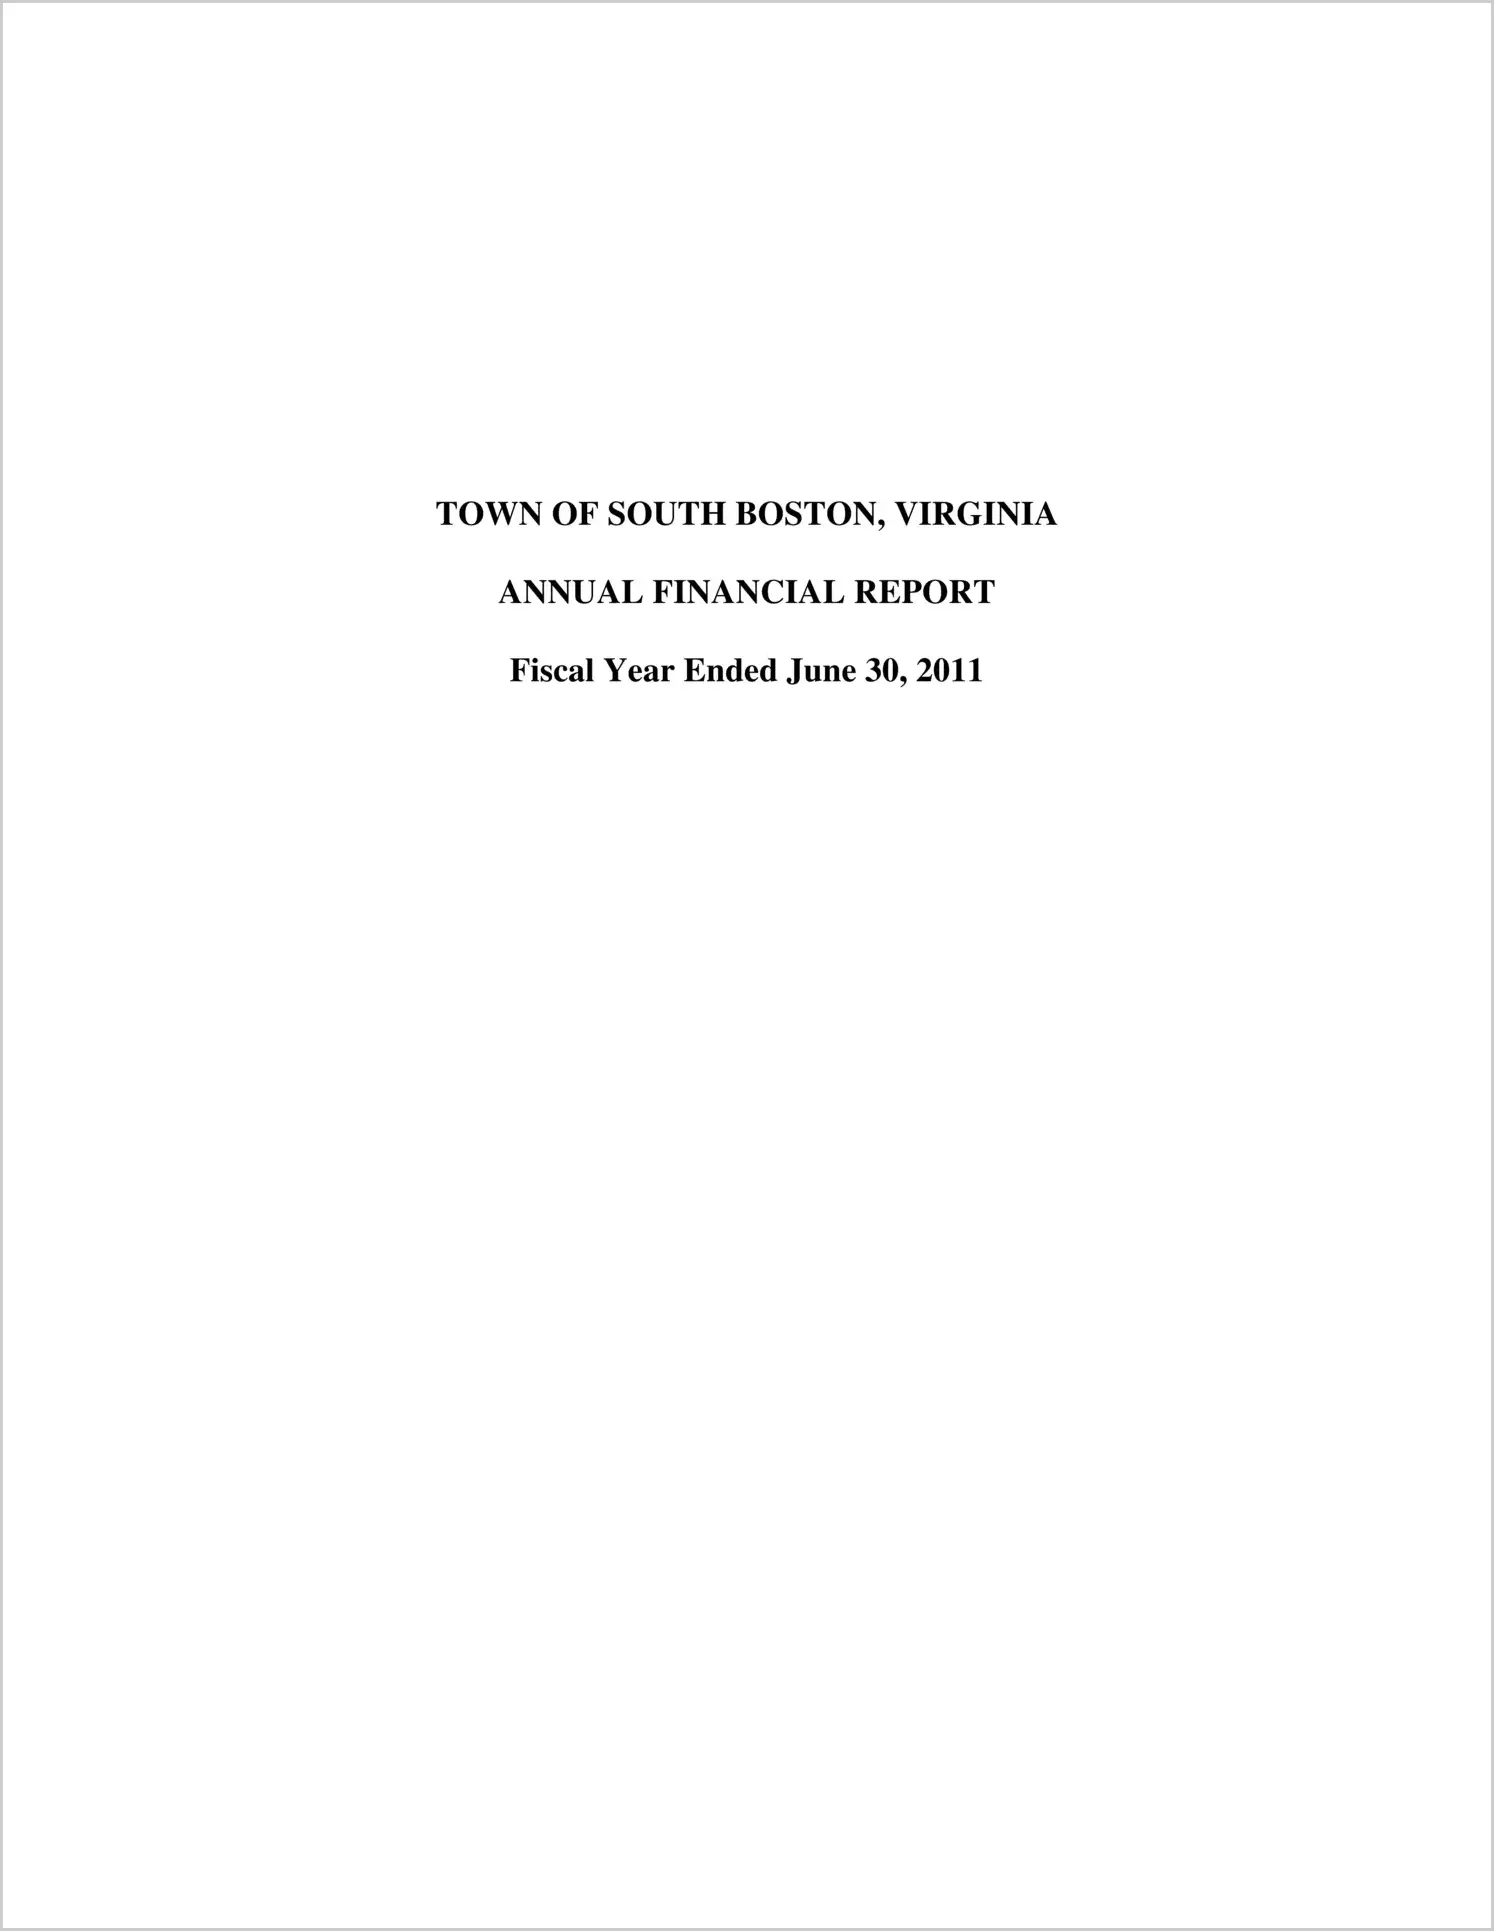 2011 Annual Financial Report for Town of South Boston